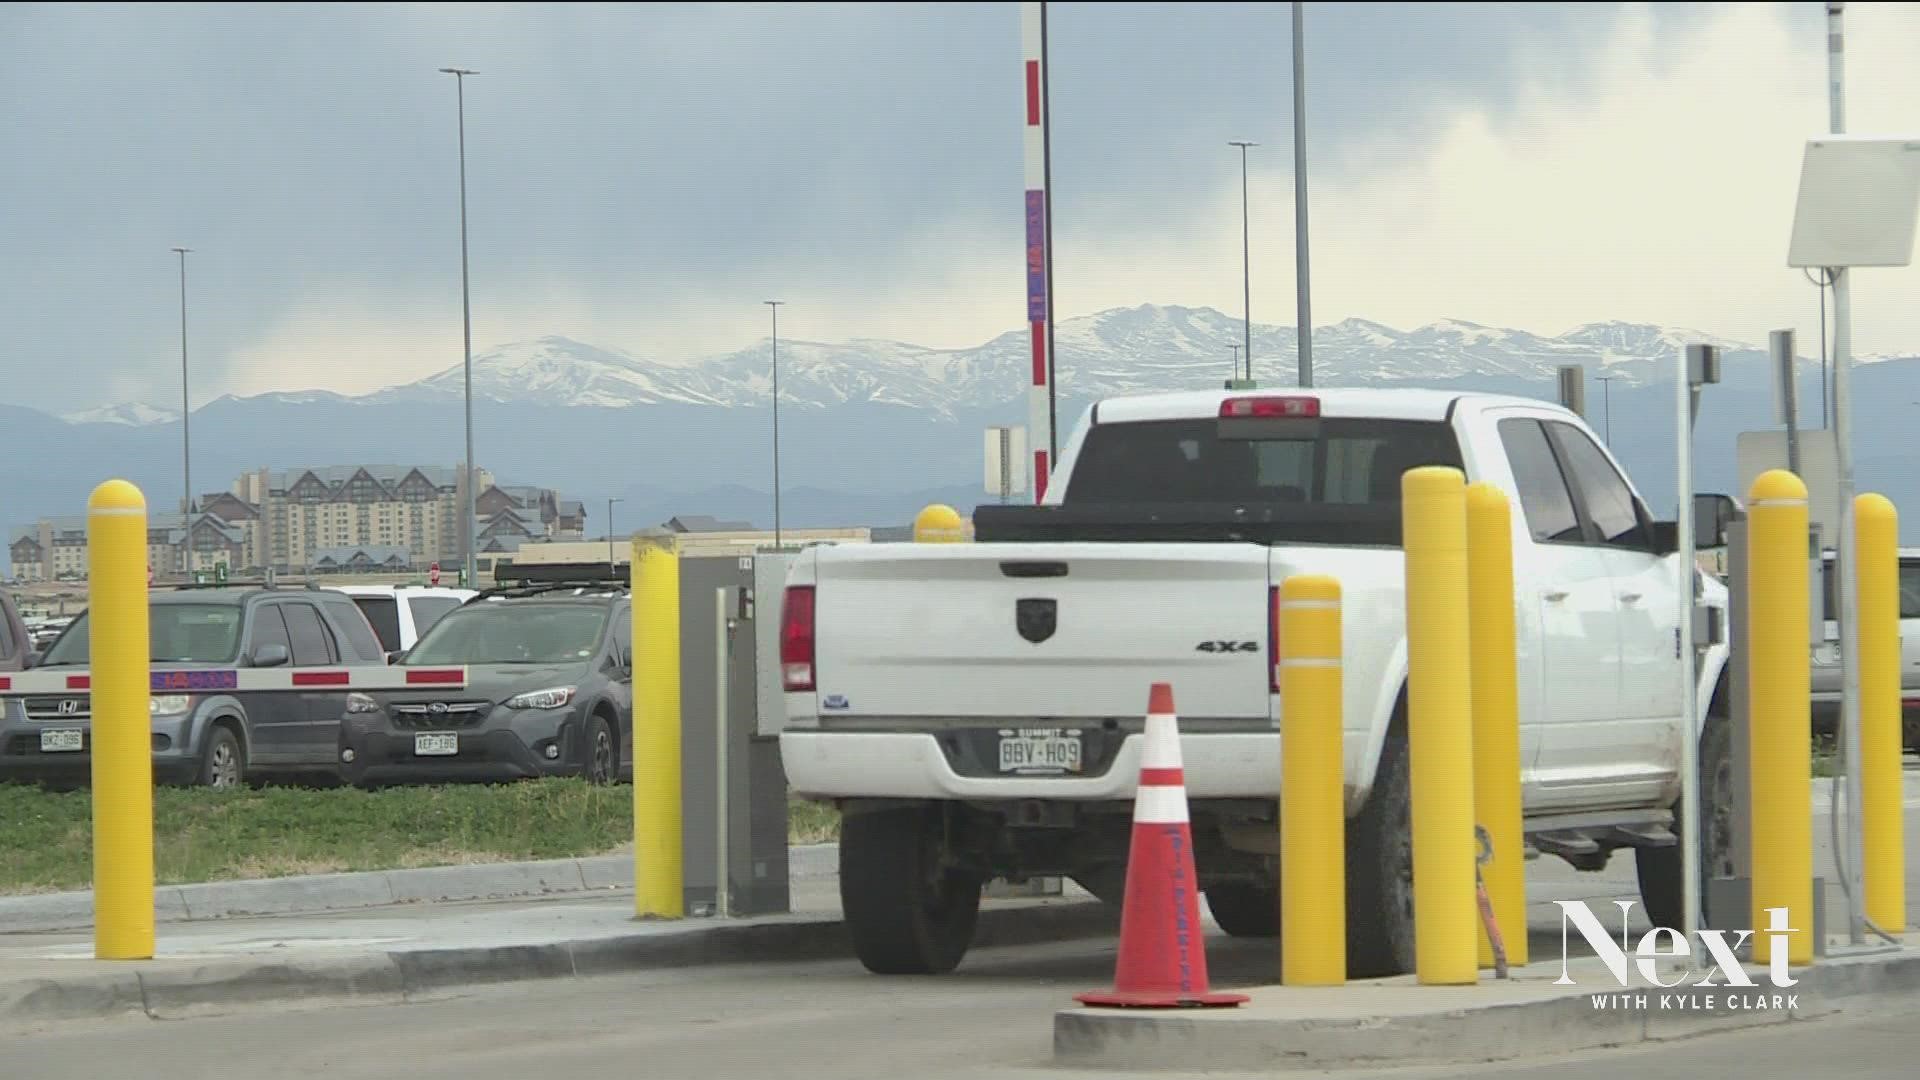 A family was at Disney World  when a thief stole their truck from the Pikes Peak lot at DIA. The victim couldn’t report his car stolen because someone retitled it.